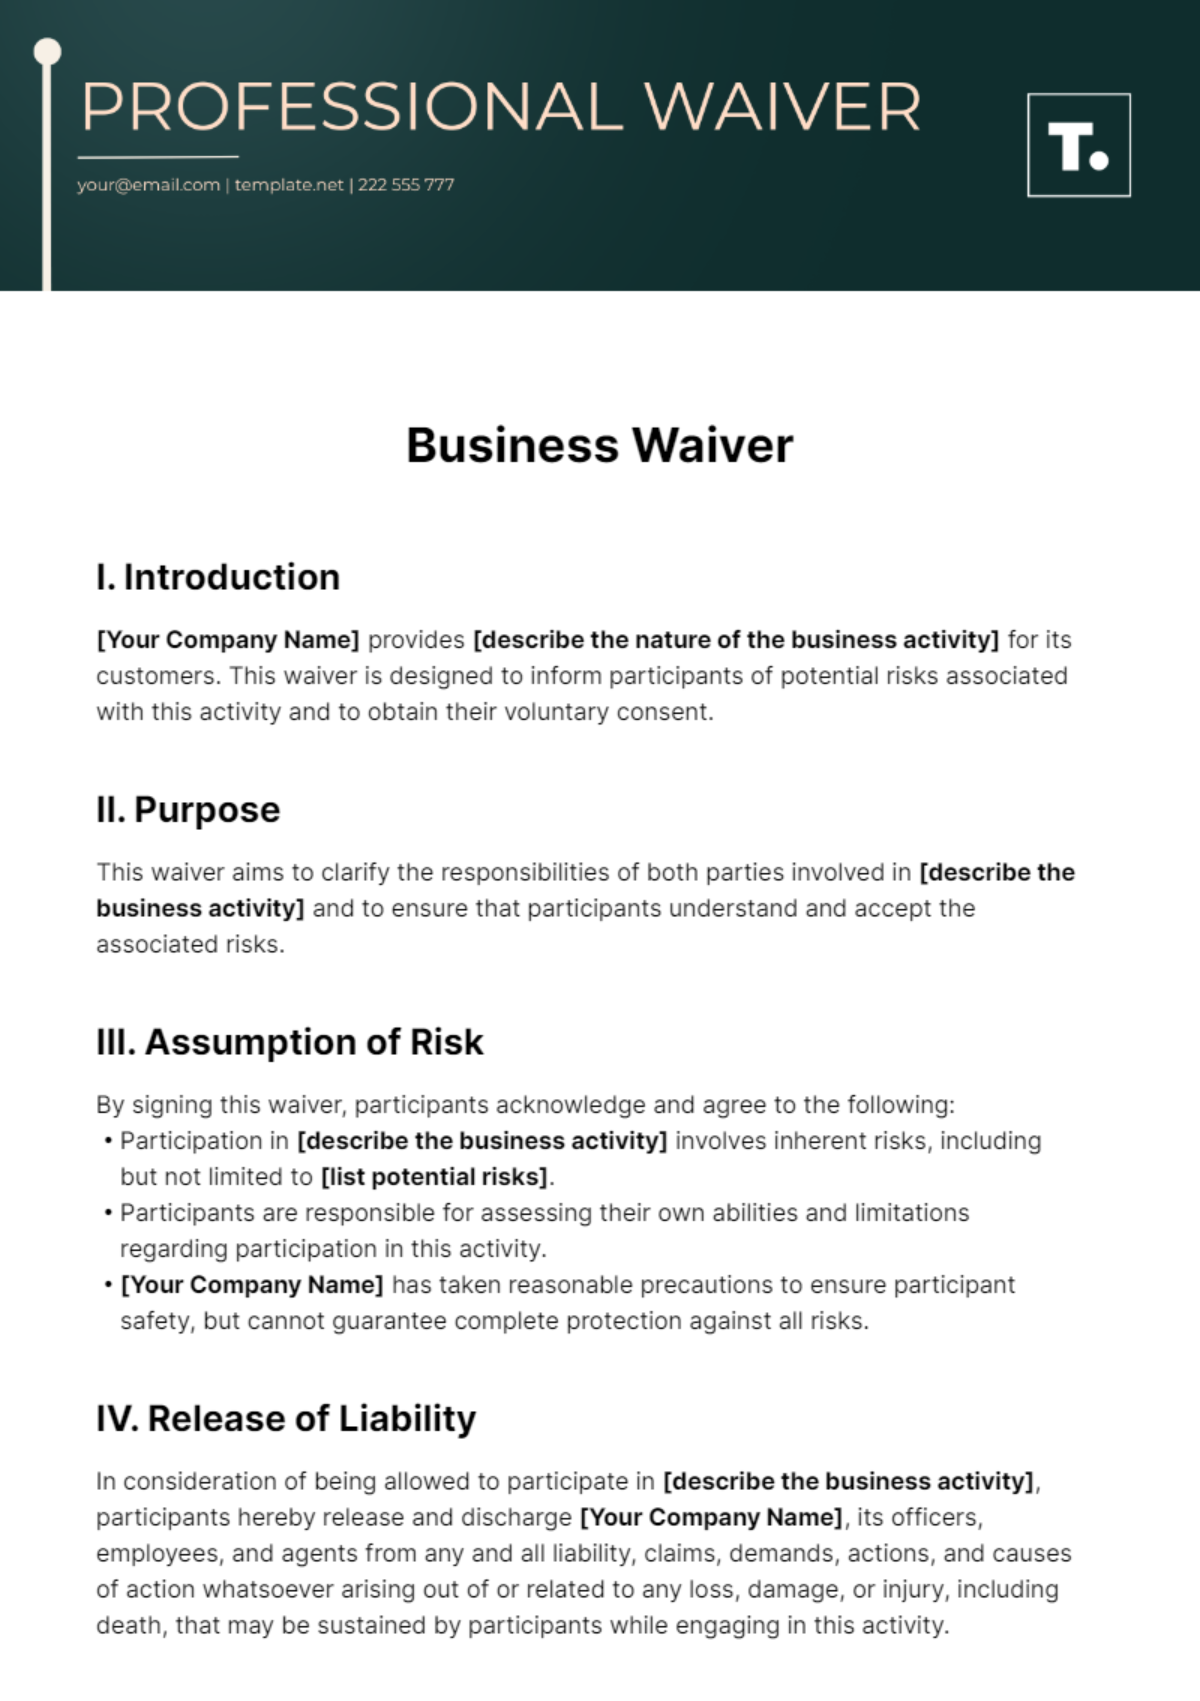 Business Waiver Template